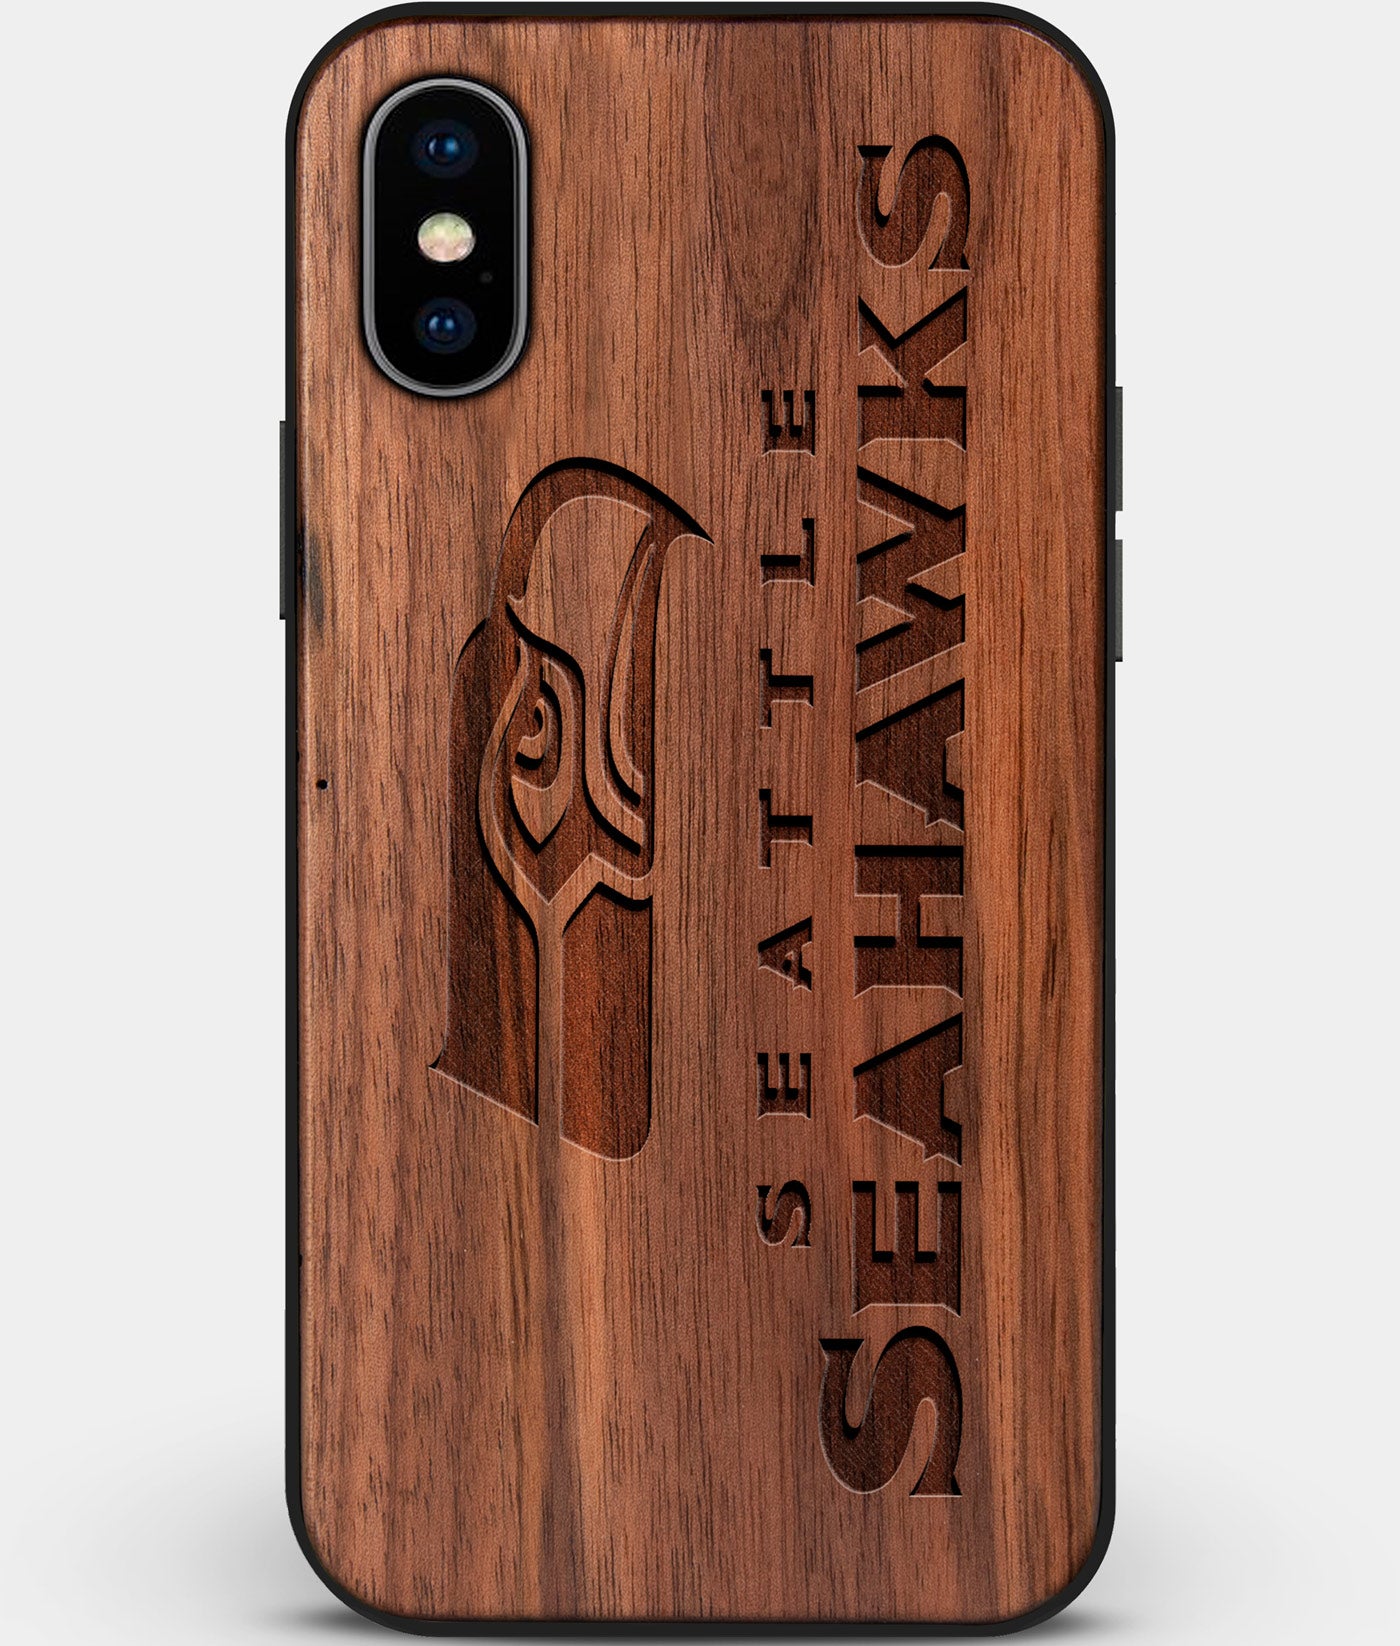 Custom Carved Wood Seattle Seahawks iPhone X/XS Case | Personalized Walnut Wood Seattle Seahawks Cover, Birthday Gift, Gifts For Him, Monogrammed Gift For Fan | by Engraved In Nature